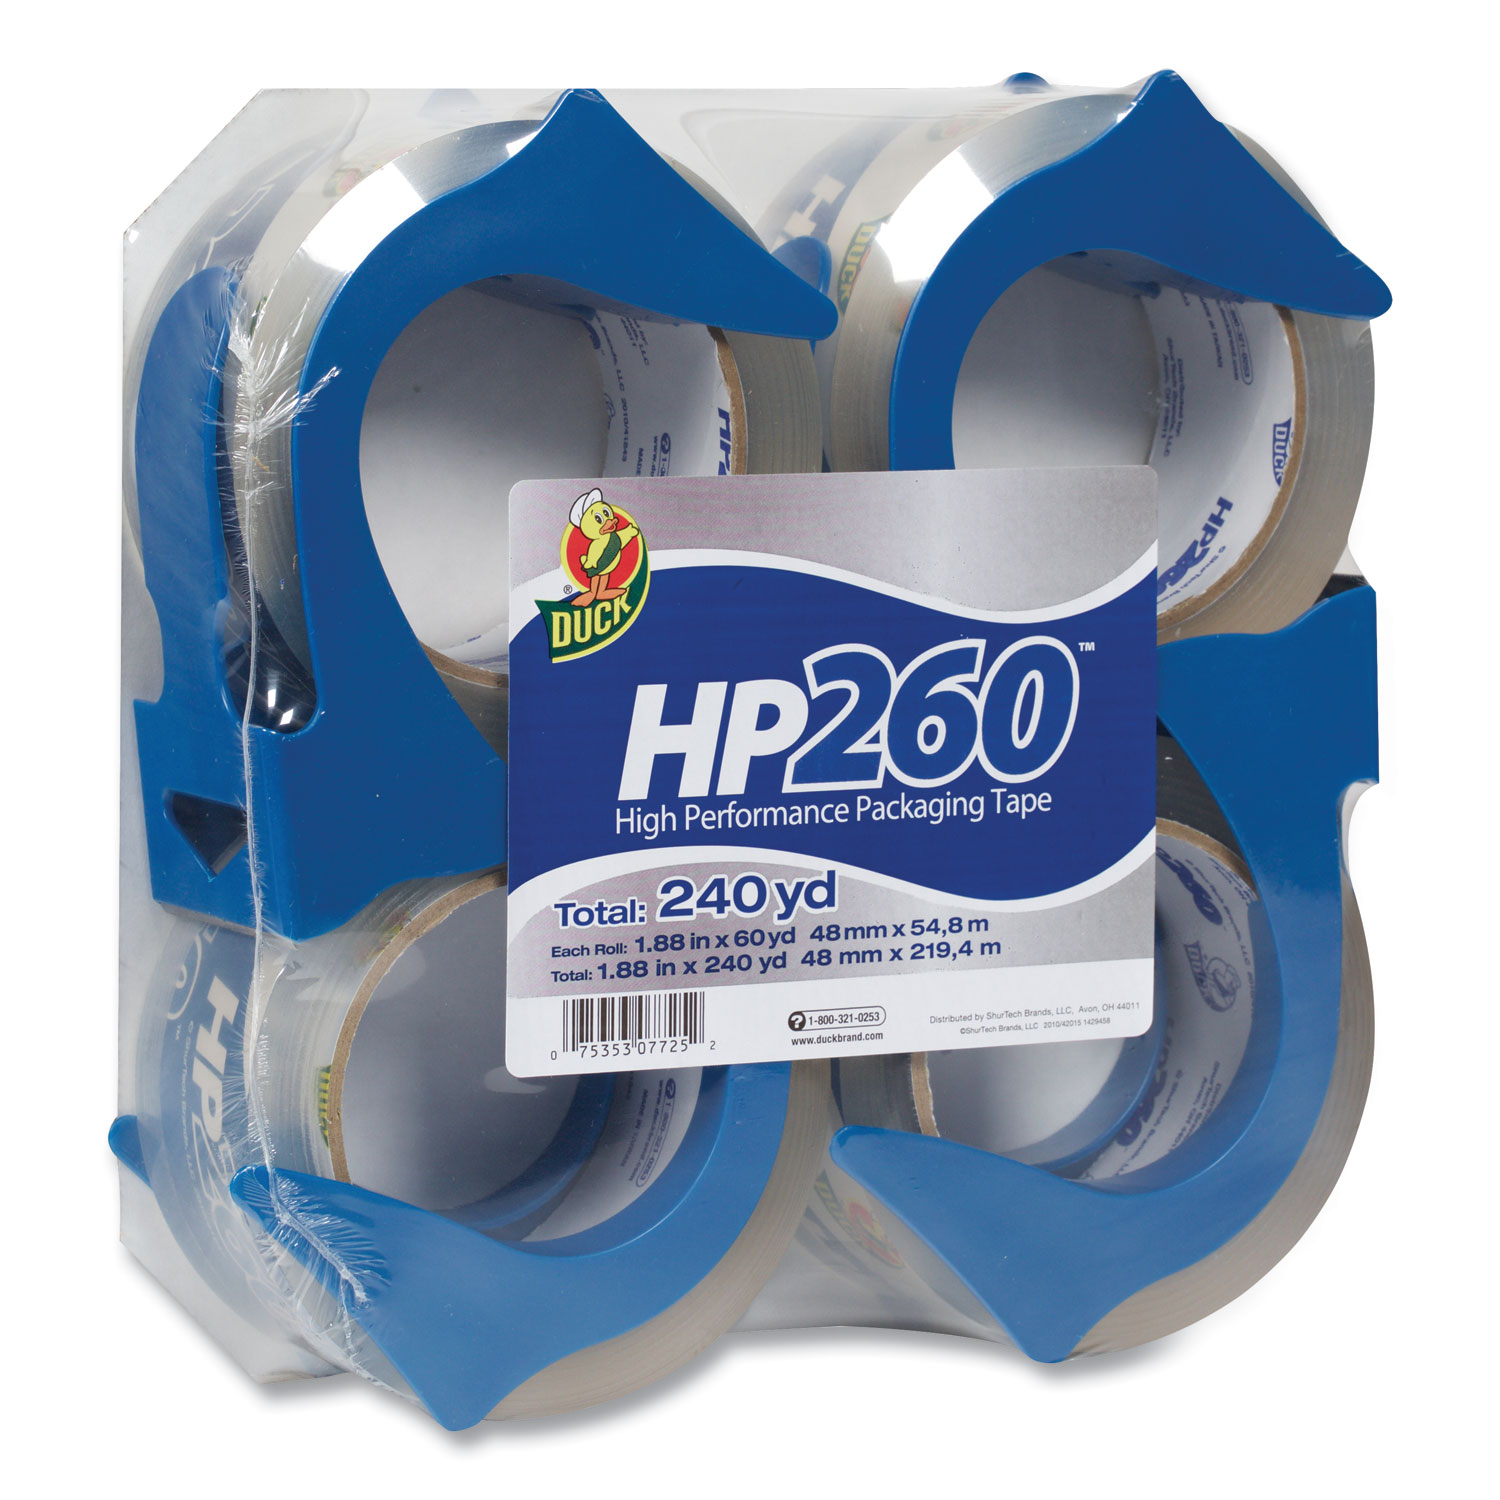  Duck 00-07725 HP260 Packaging Tape with Dispenser, 3 Core, 1.88 x 60 yds, Clear, 4/Pack (DUC0007725) 